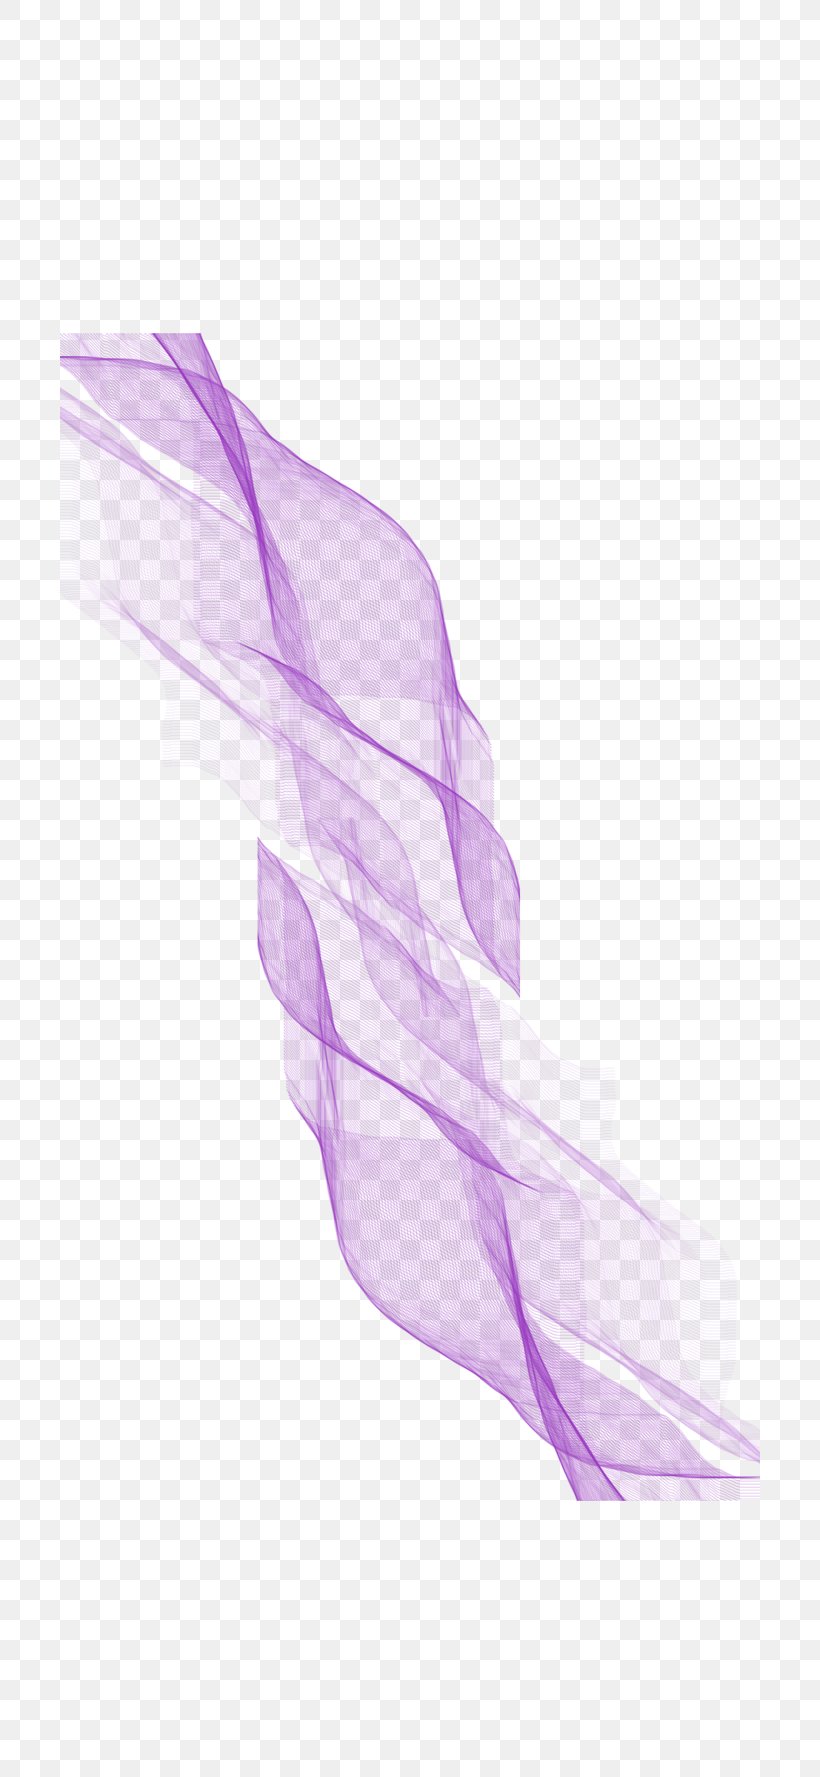 Purple Computer File, PNG, 700x1777px, Ribbon, Hand, Illustration, Lavender, Lilac Download Free